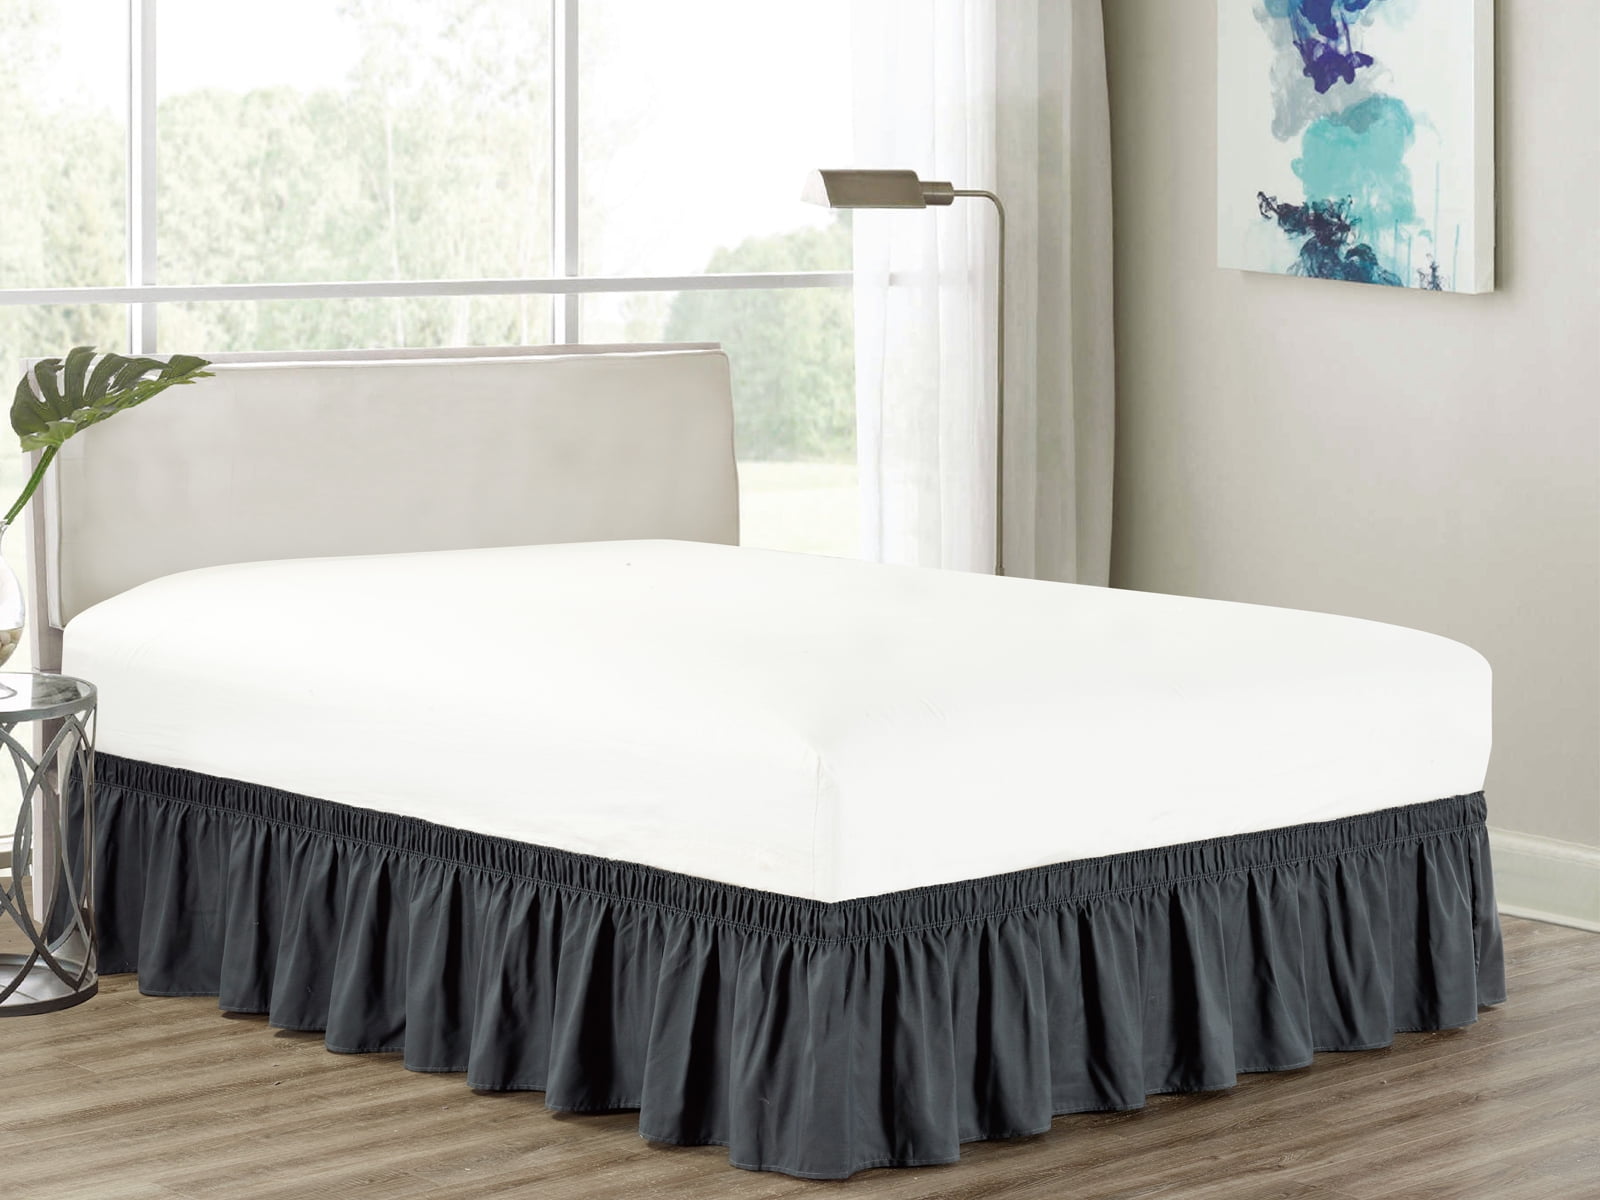 Details about   Silky Soft & Wrinkle Free Elastic Wrap Around Bed Skirt Microfiber Chocolate 